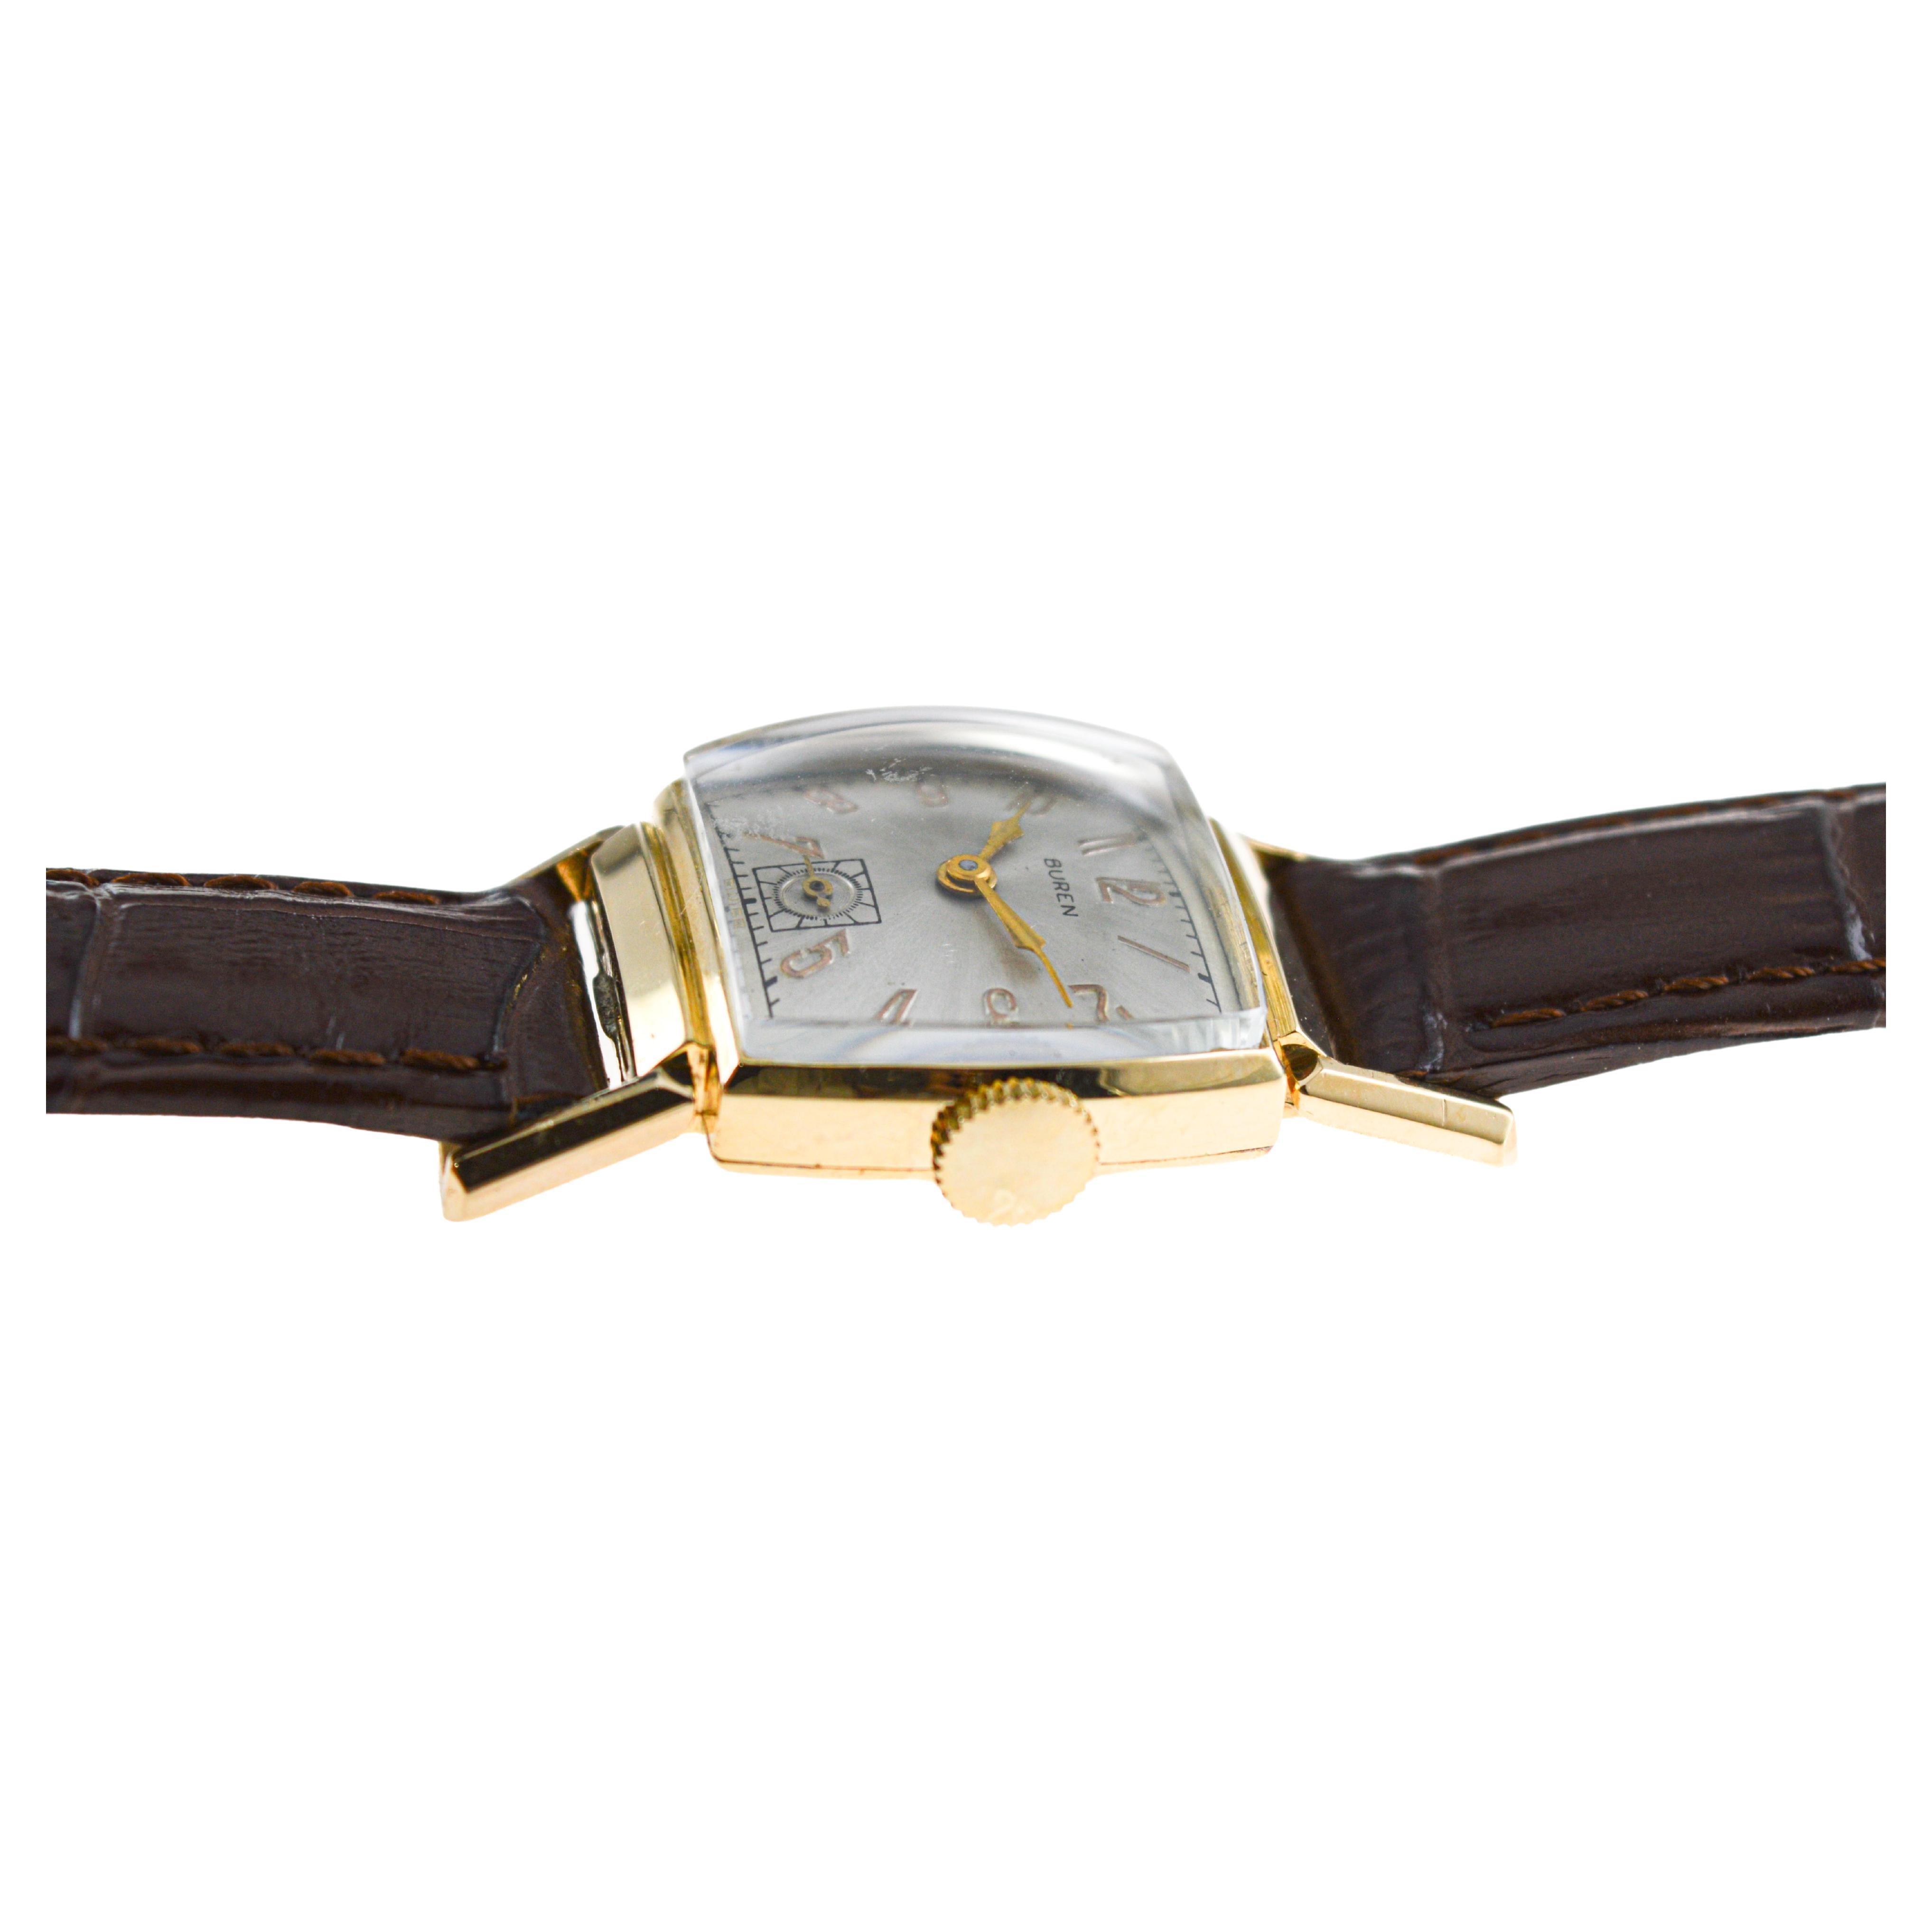 Buren Gold Filled Art Deco Watch with Articulated Lugs From the 1940's For Sale 3